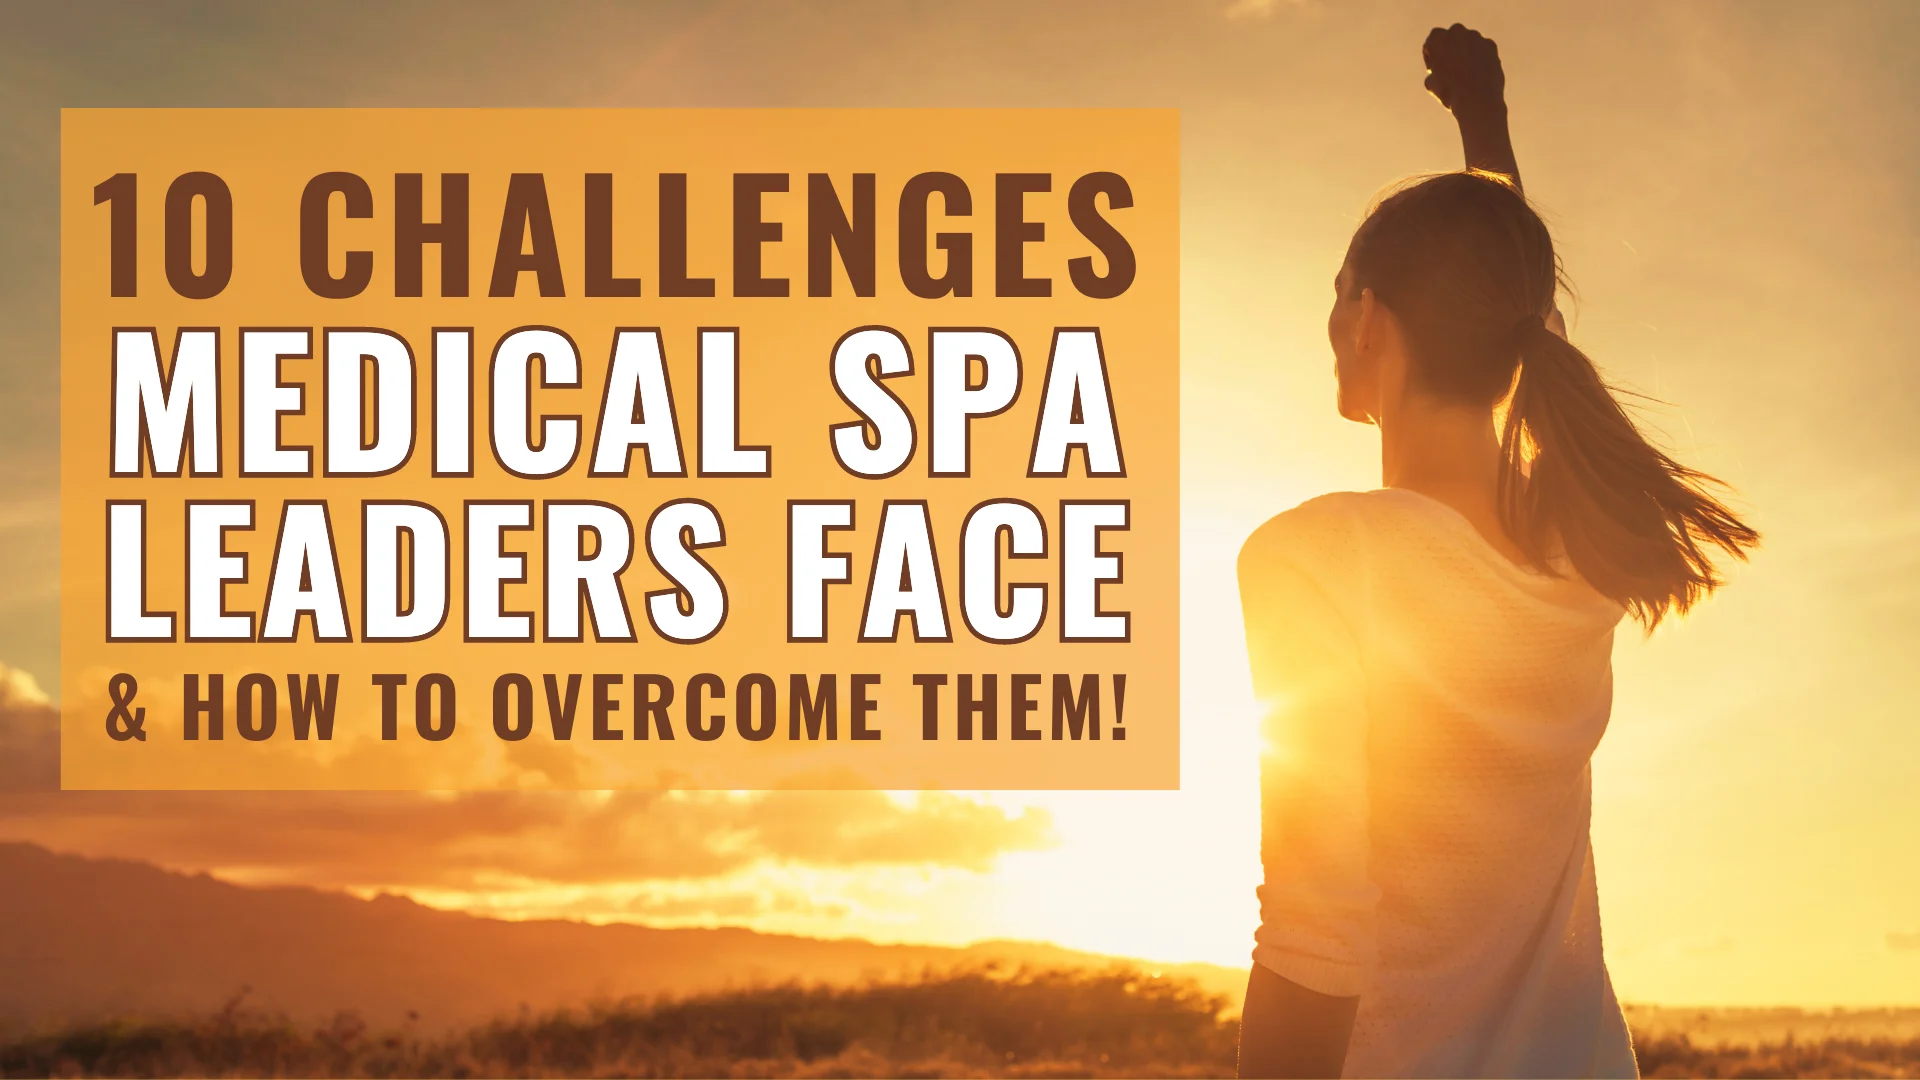 Ten Challenges Medical Spa Leaders Face & How To Avoid Them